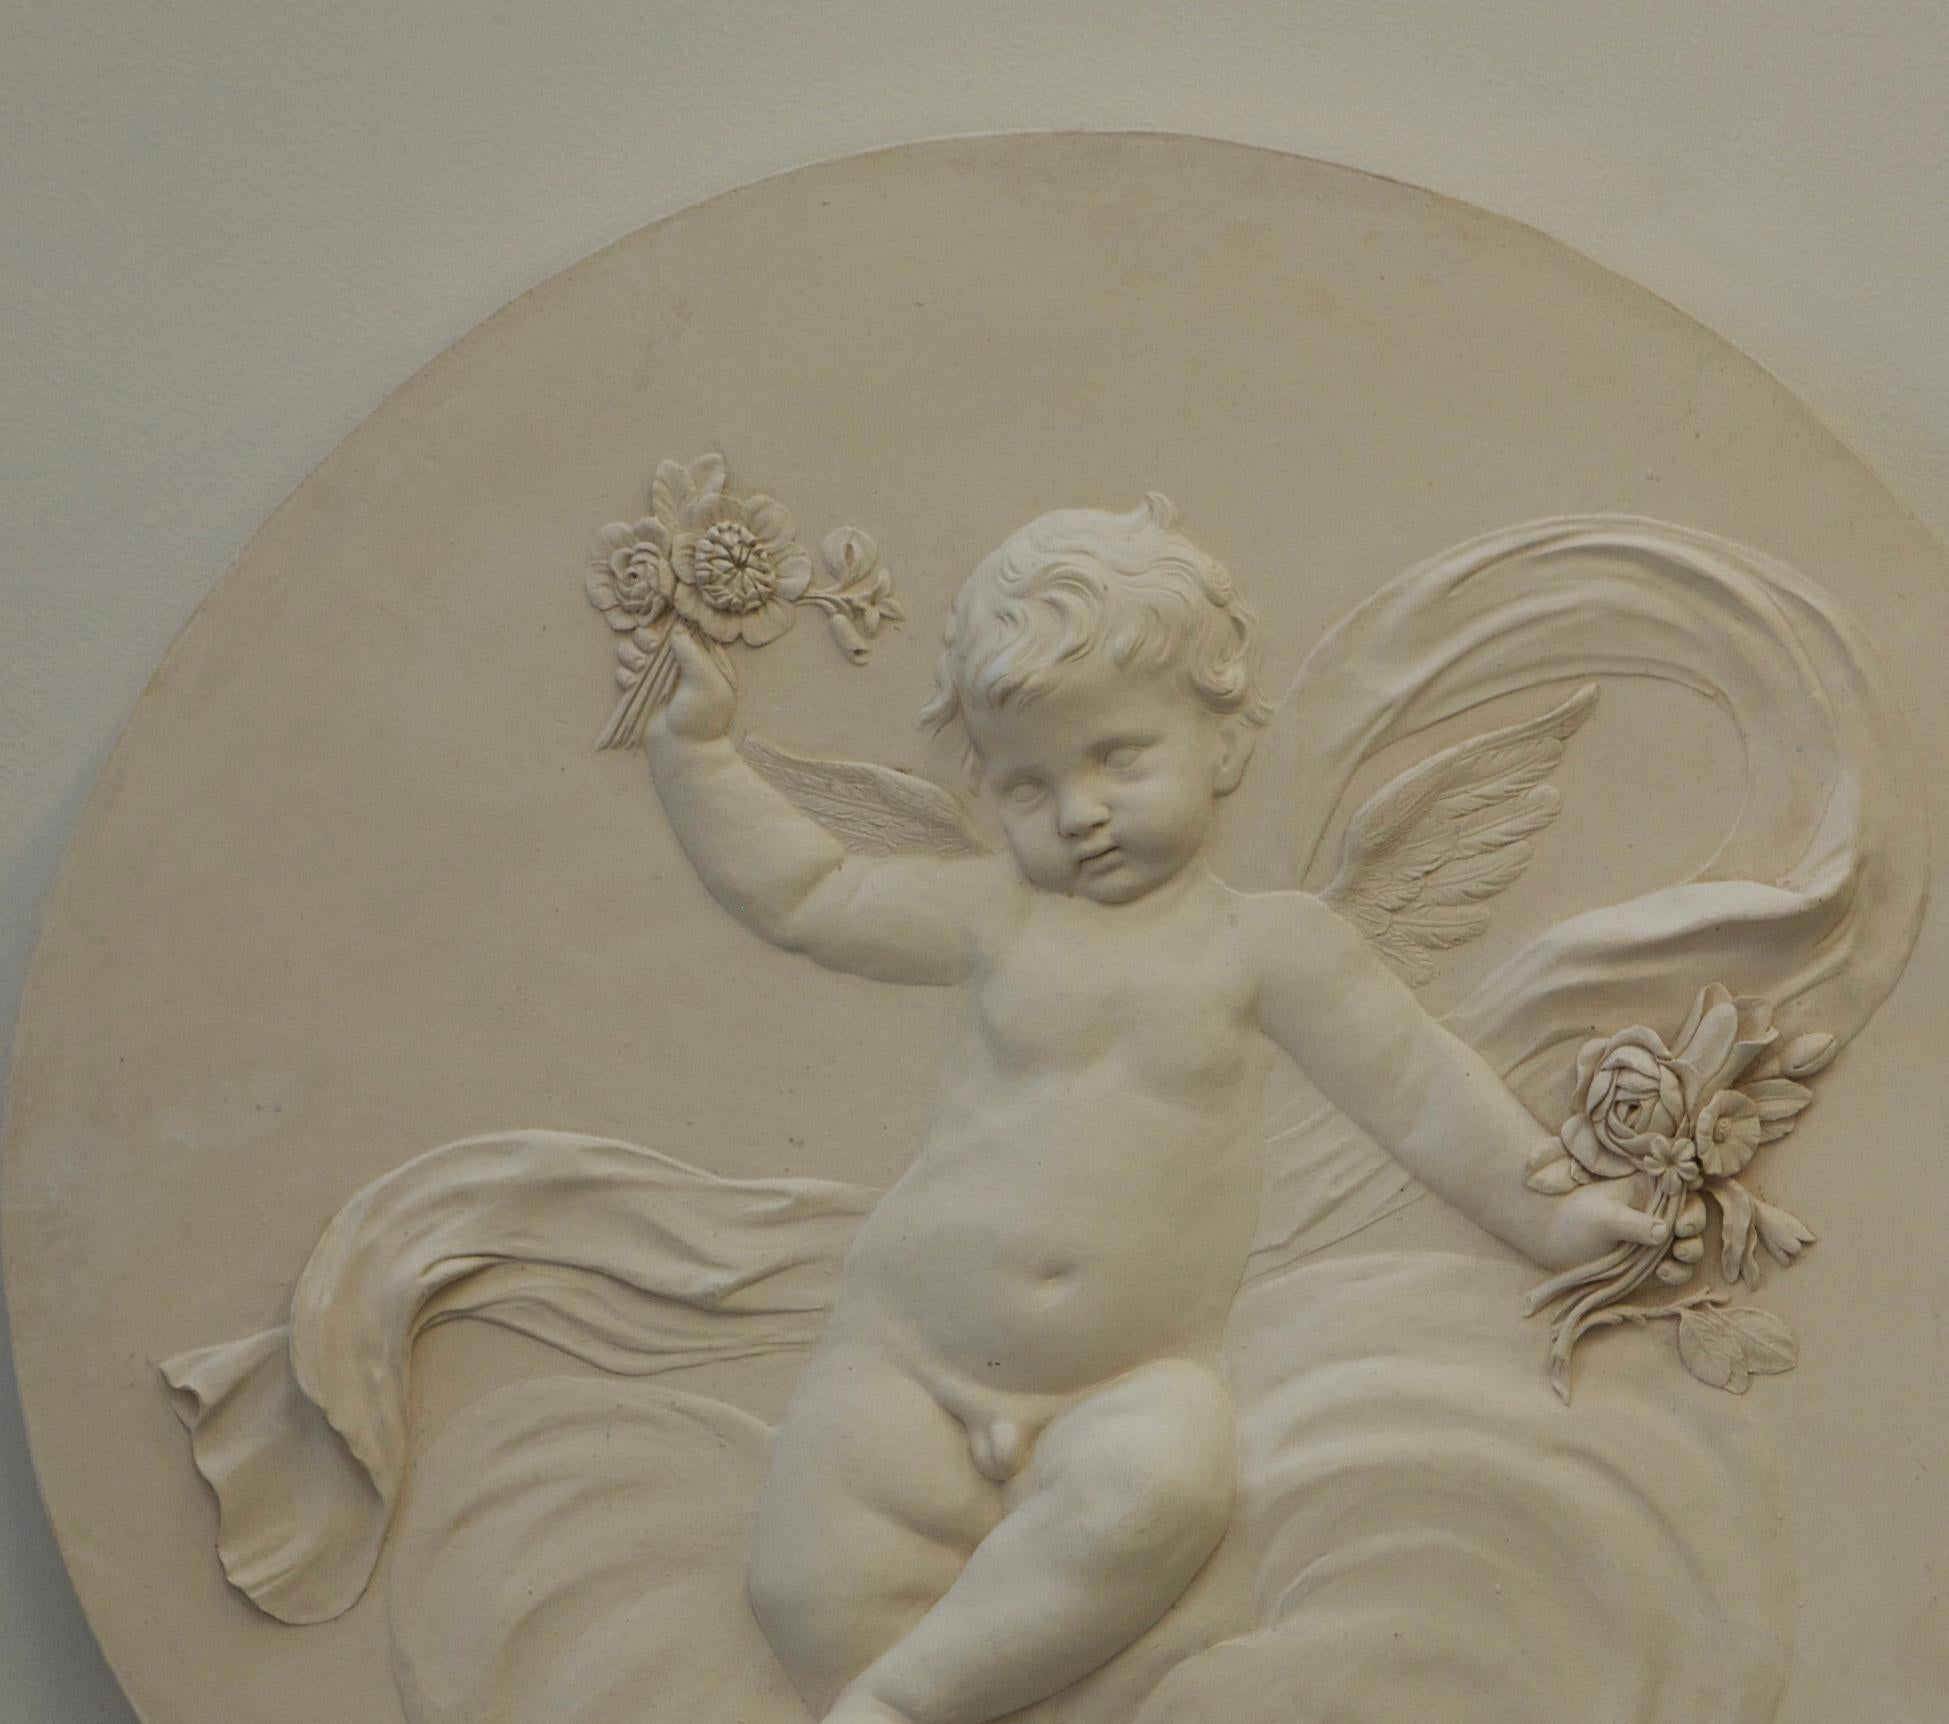 Plaster Roundel Depicting Spring from The Four Seasons Set - Sculpture by Coade